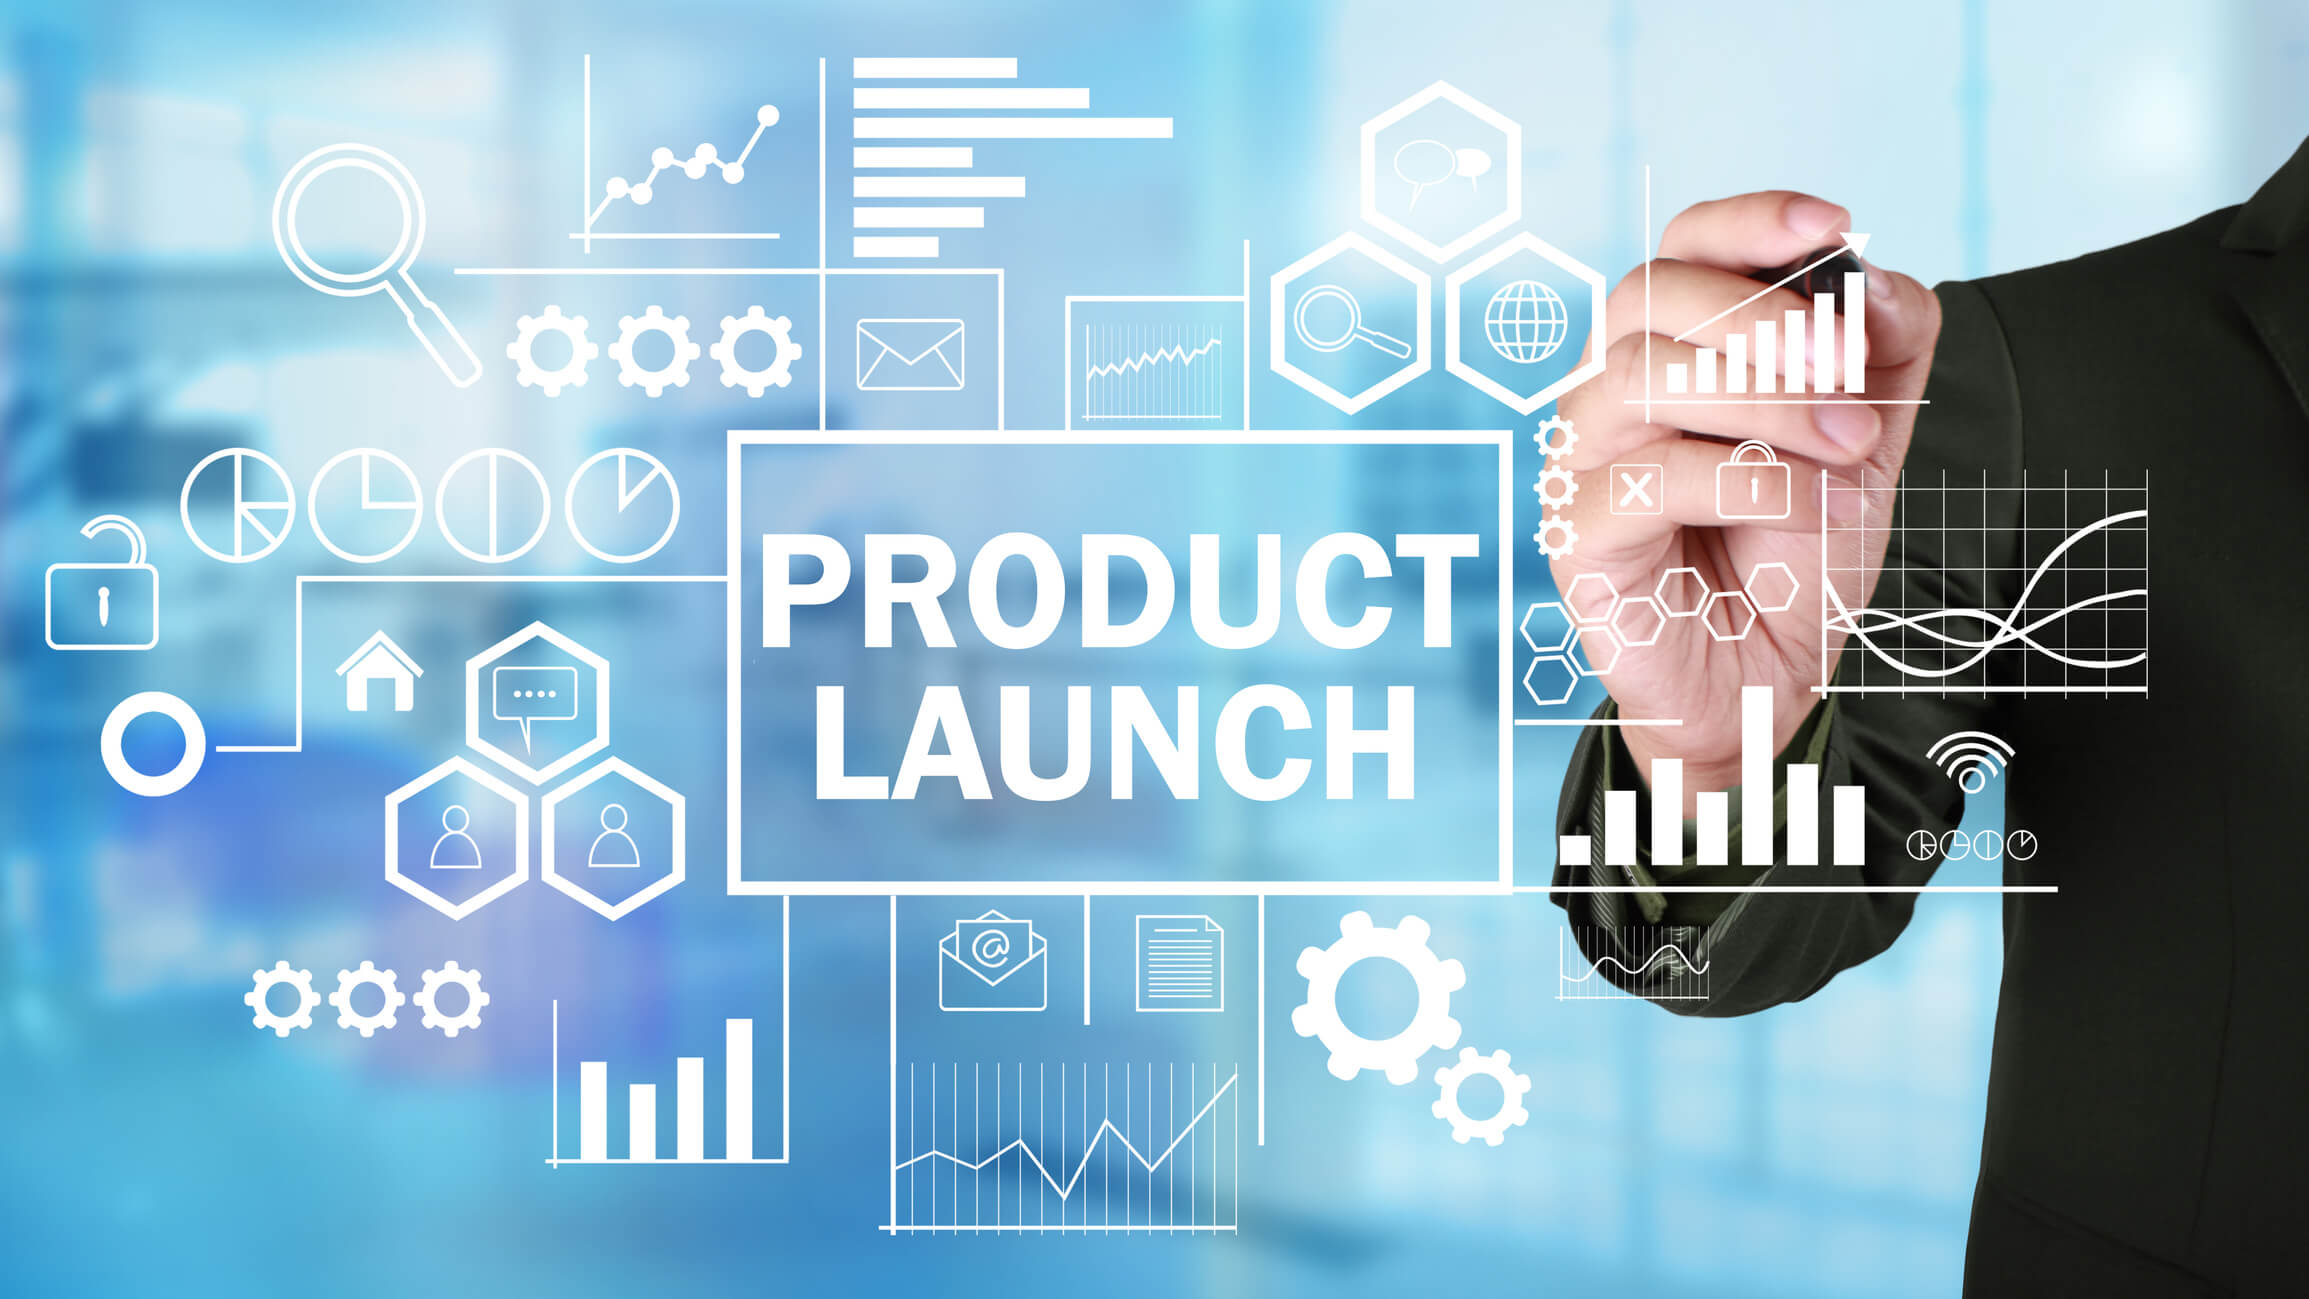 Putting Together the Best Product Launch Event